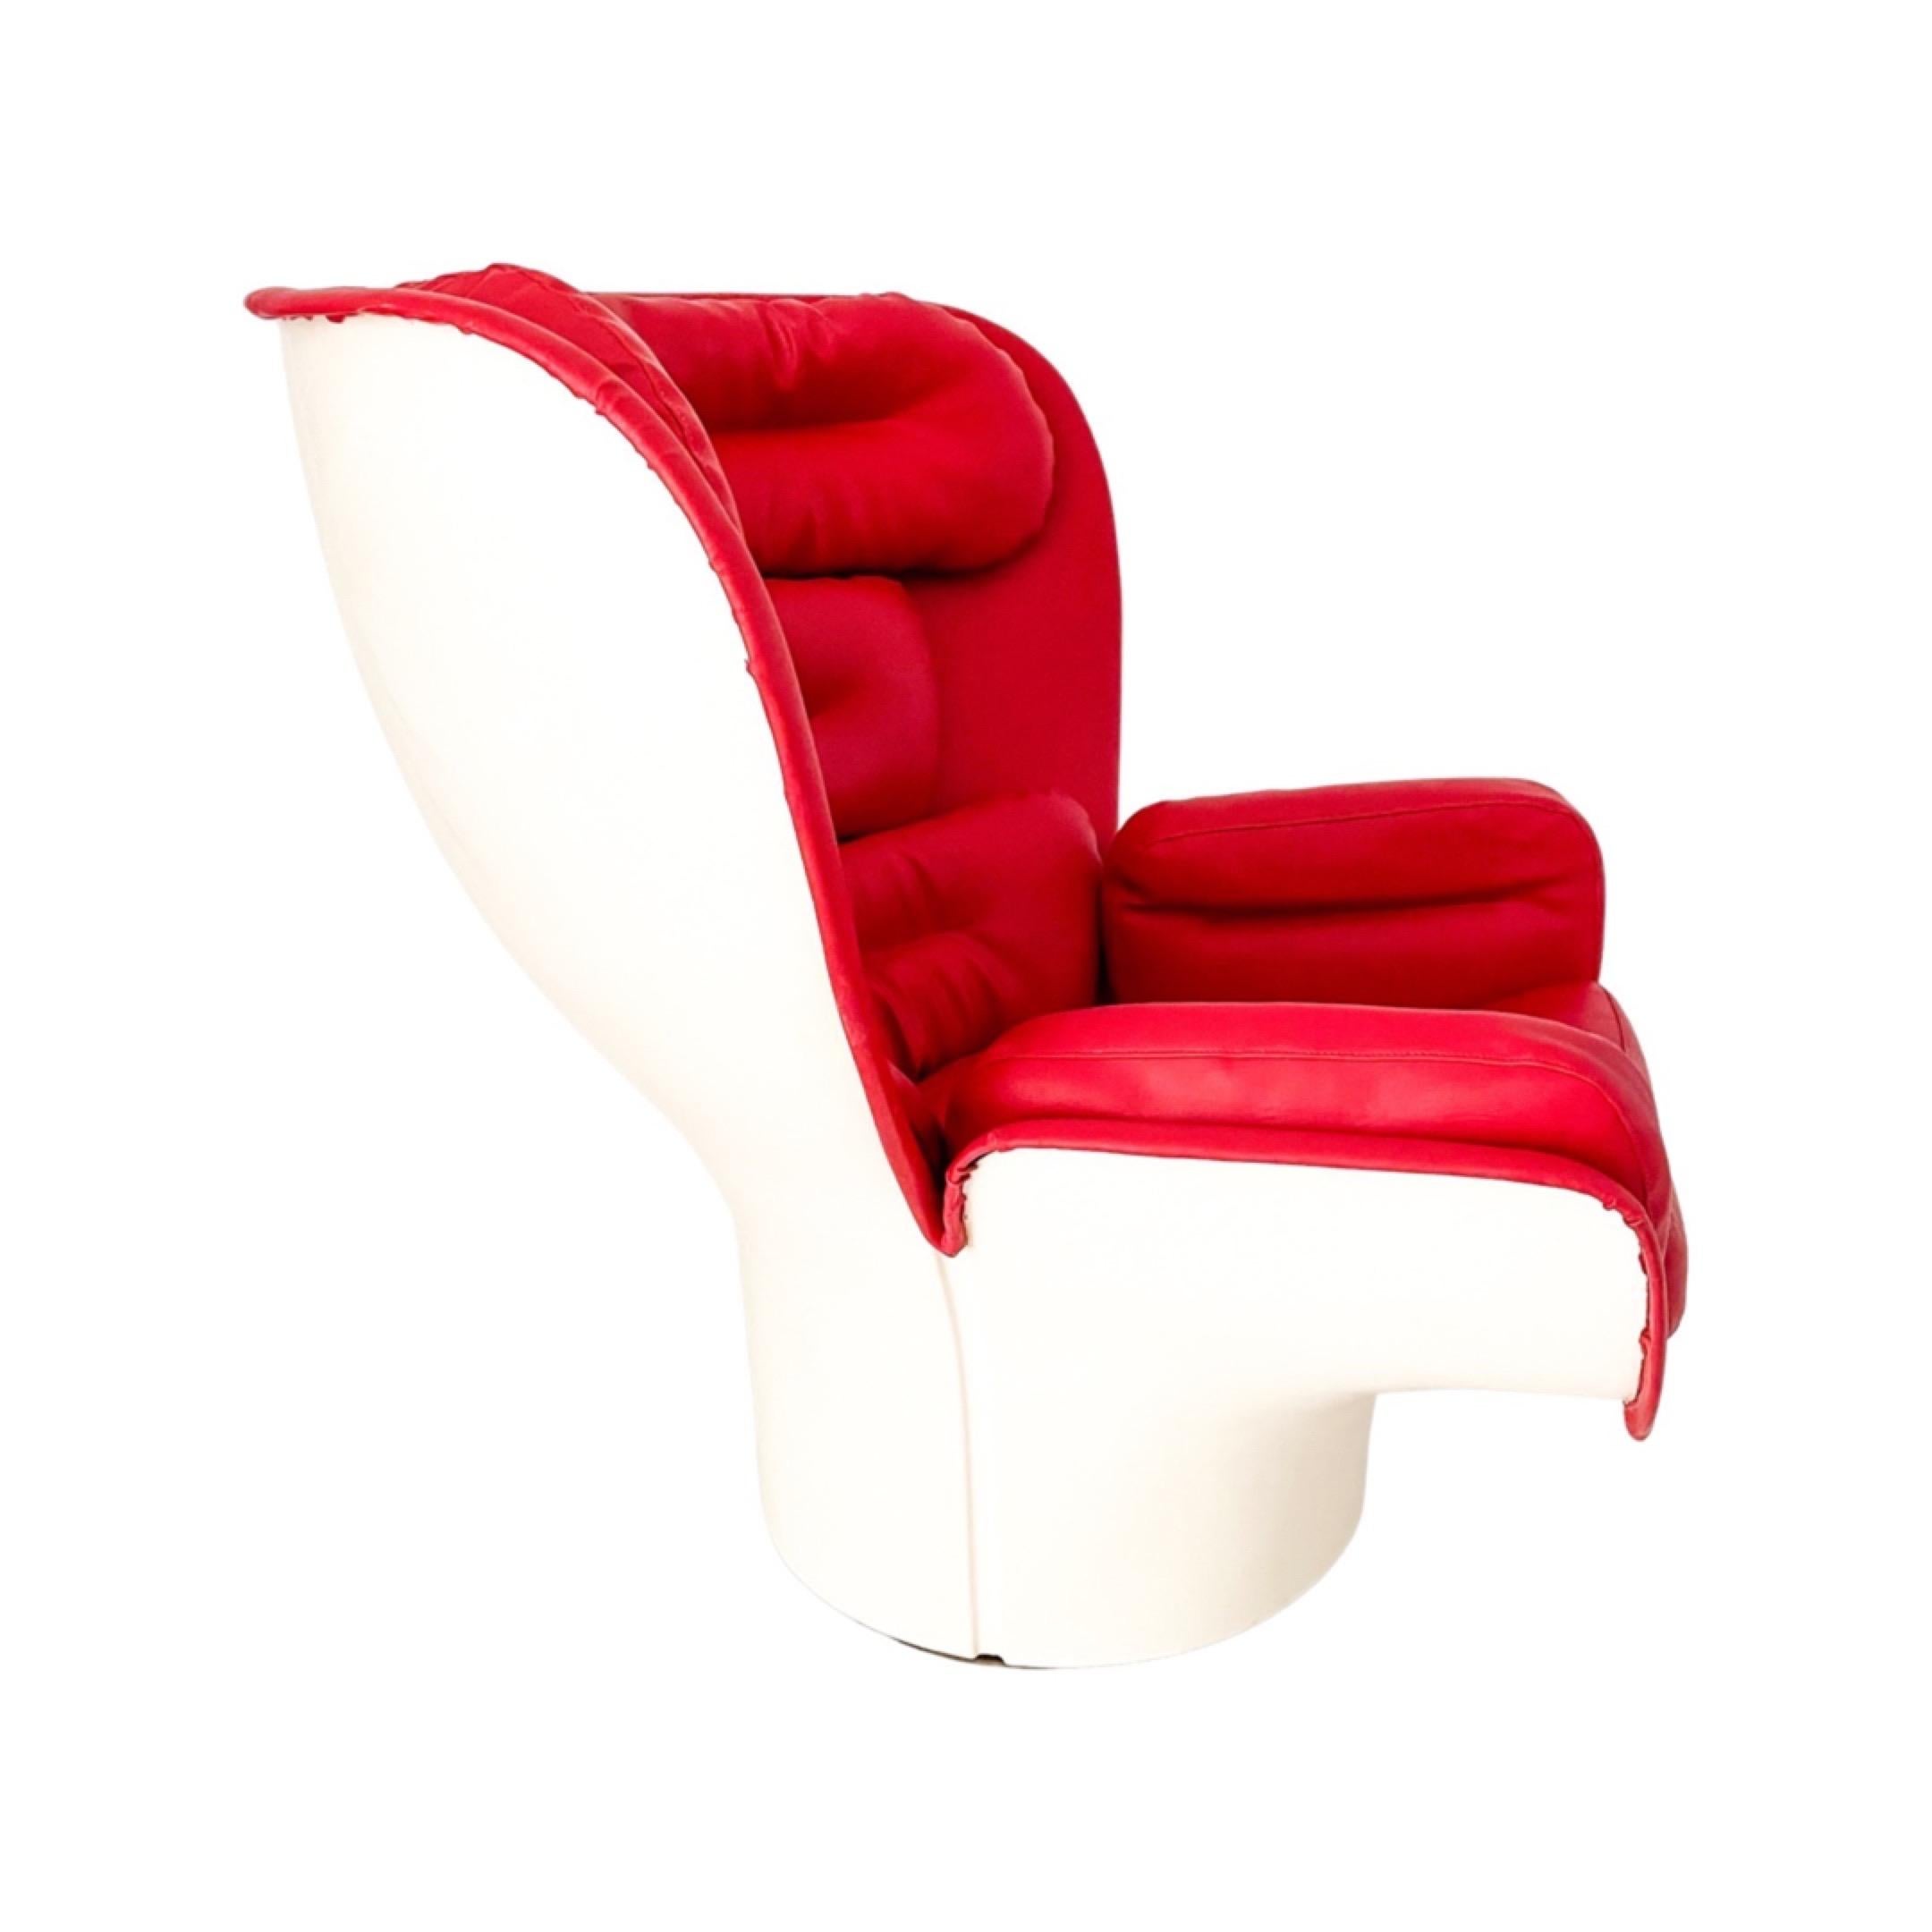 Space Age Elda Chair by Joe Colombo for Comfort C. 1960's